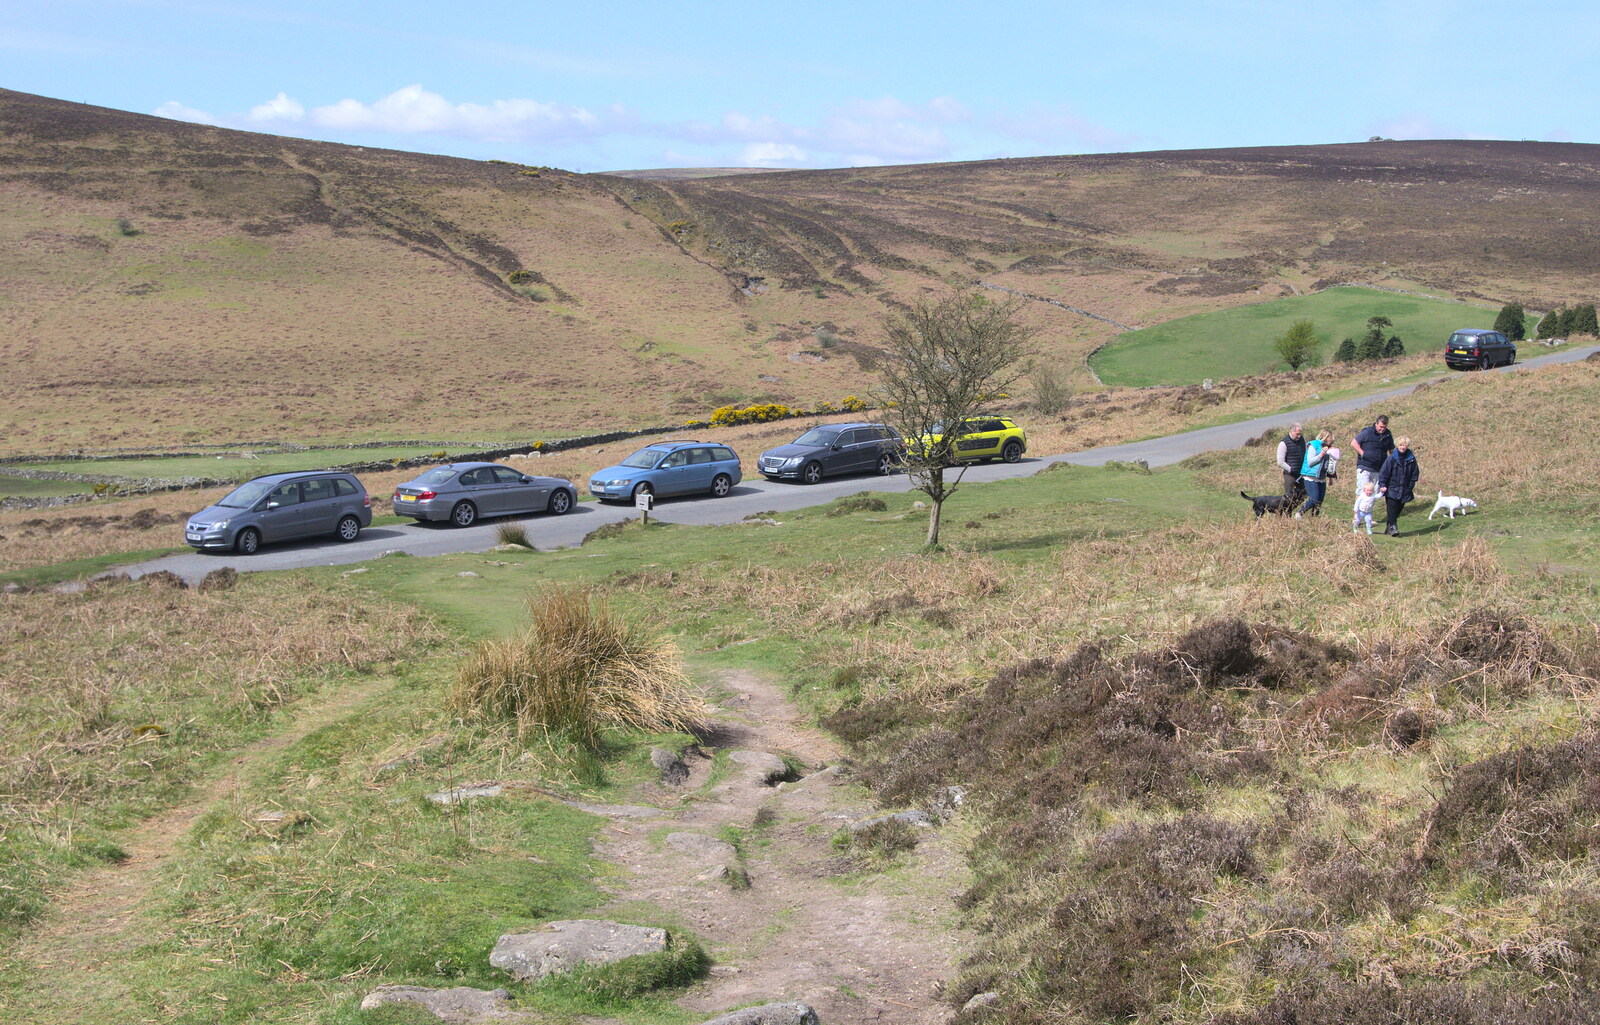 Cars parked at Grimspound from A Barbeque, Grimspound and Pizza, Dartmoor and Exeter, Devon - 15th April 2017